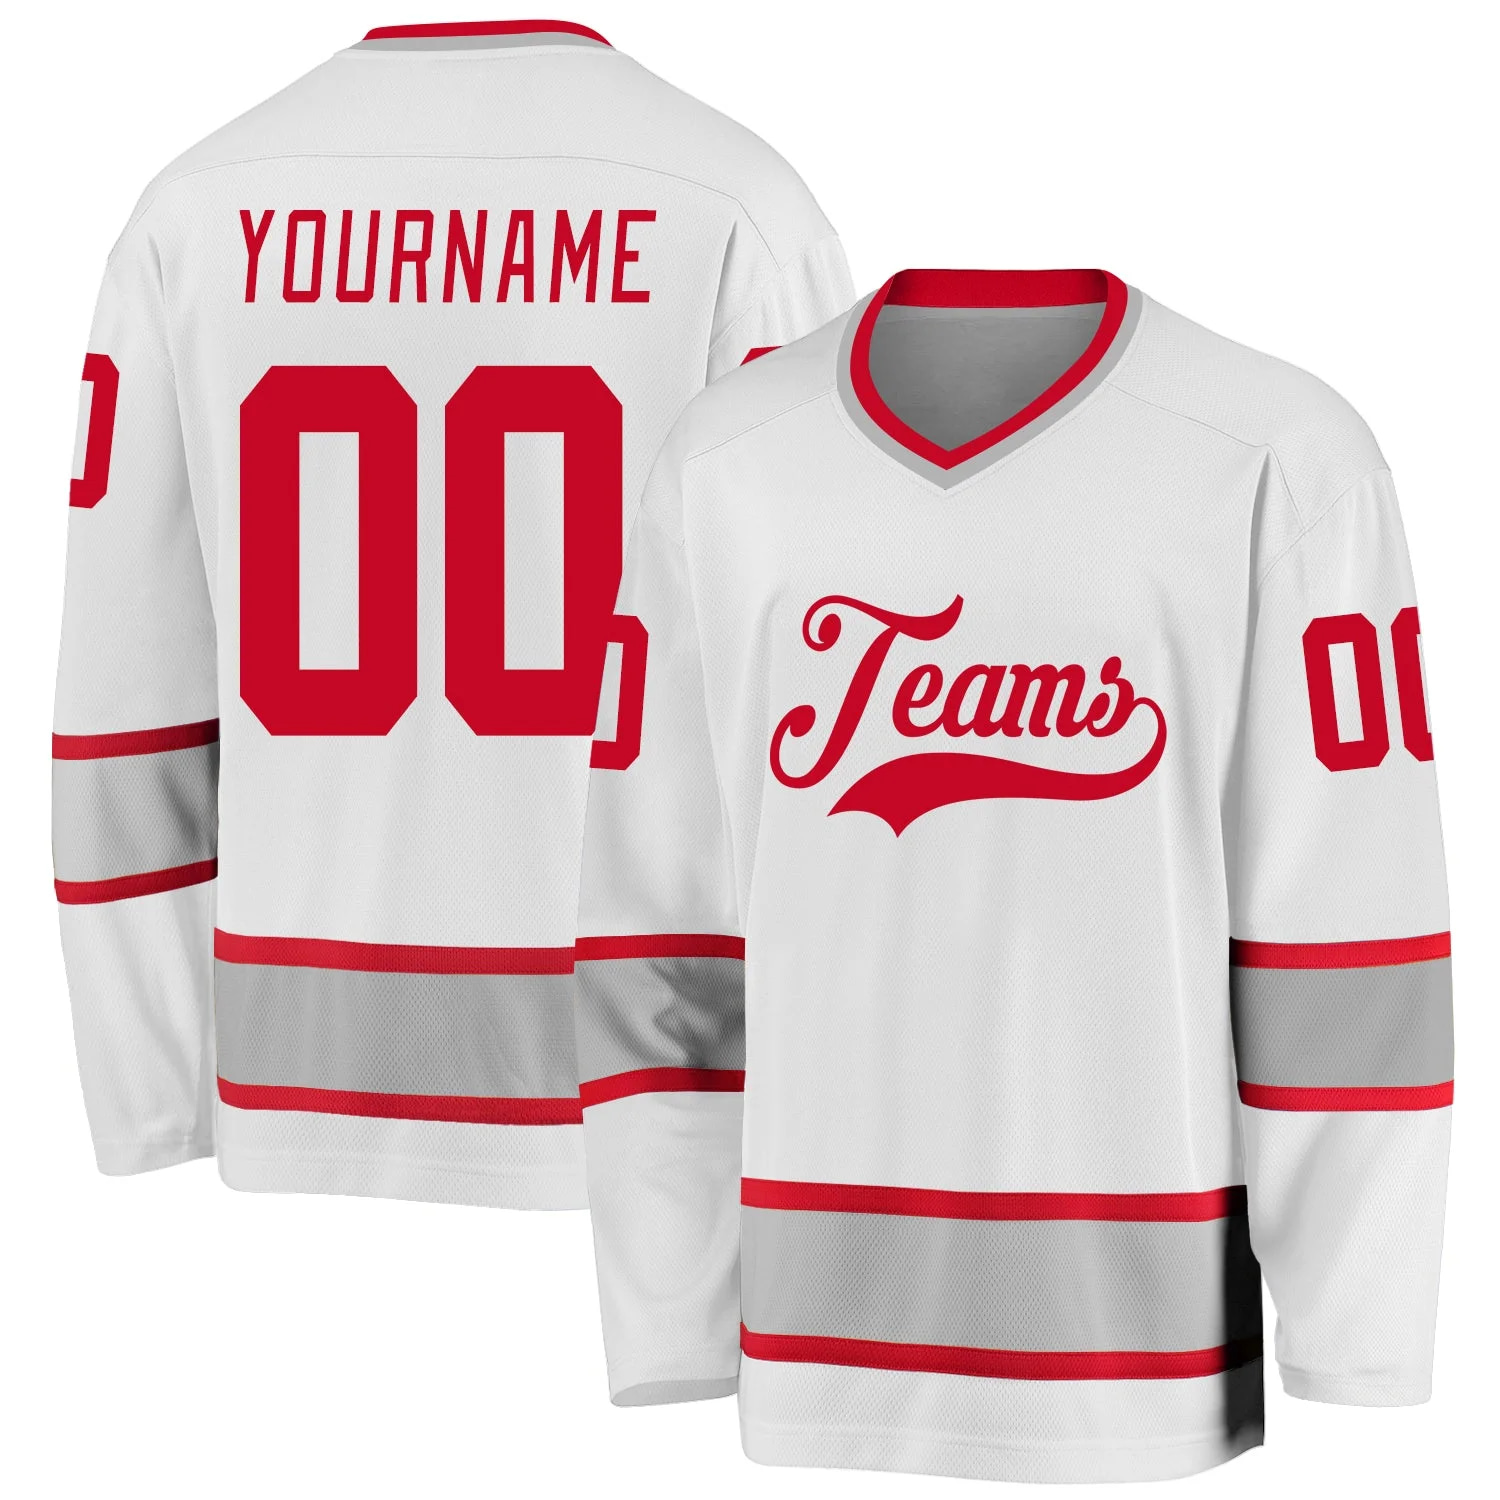 Stitched And Print White Red-gray Hockey Jersey Custom